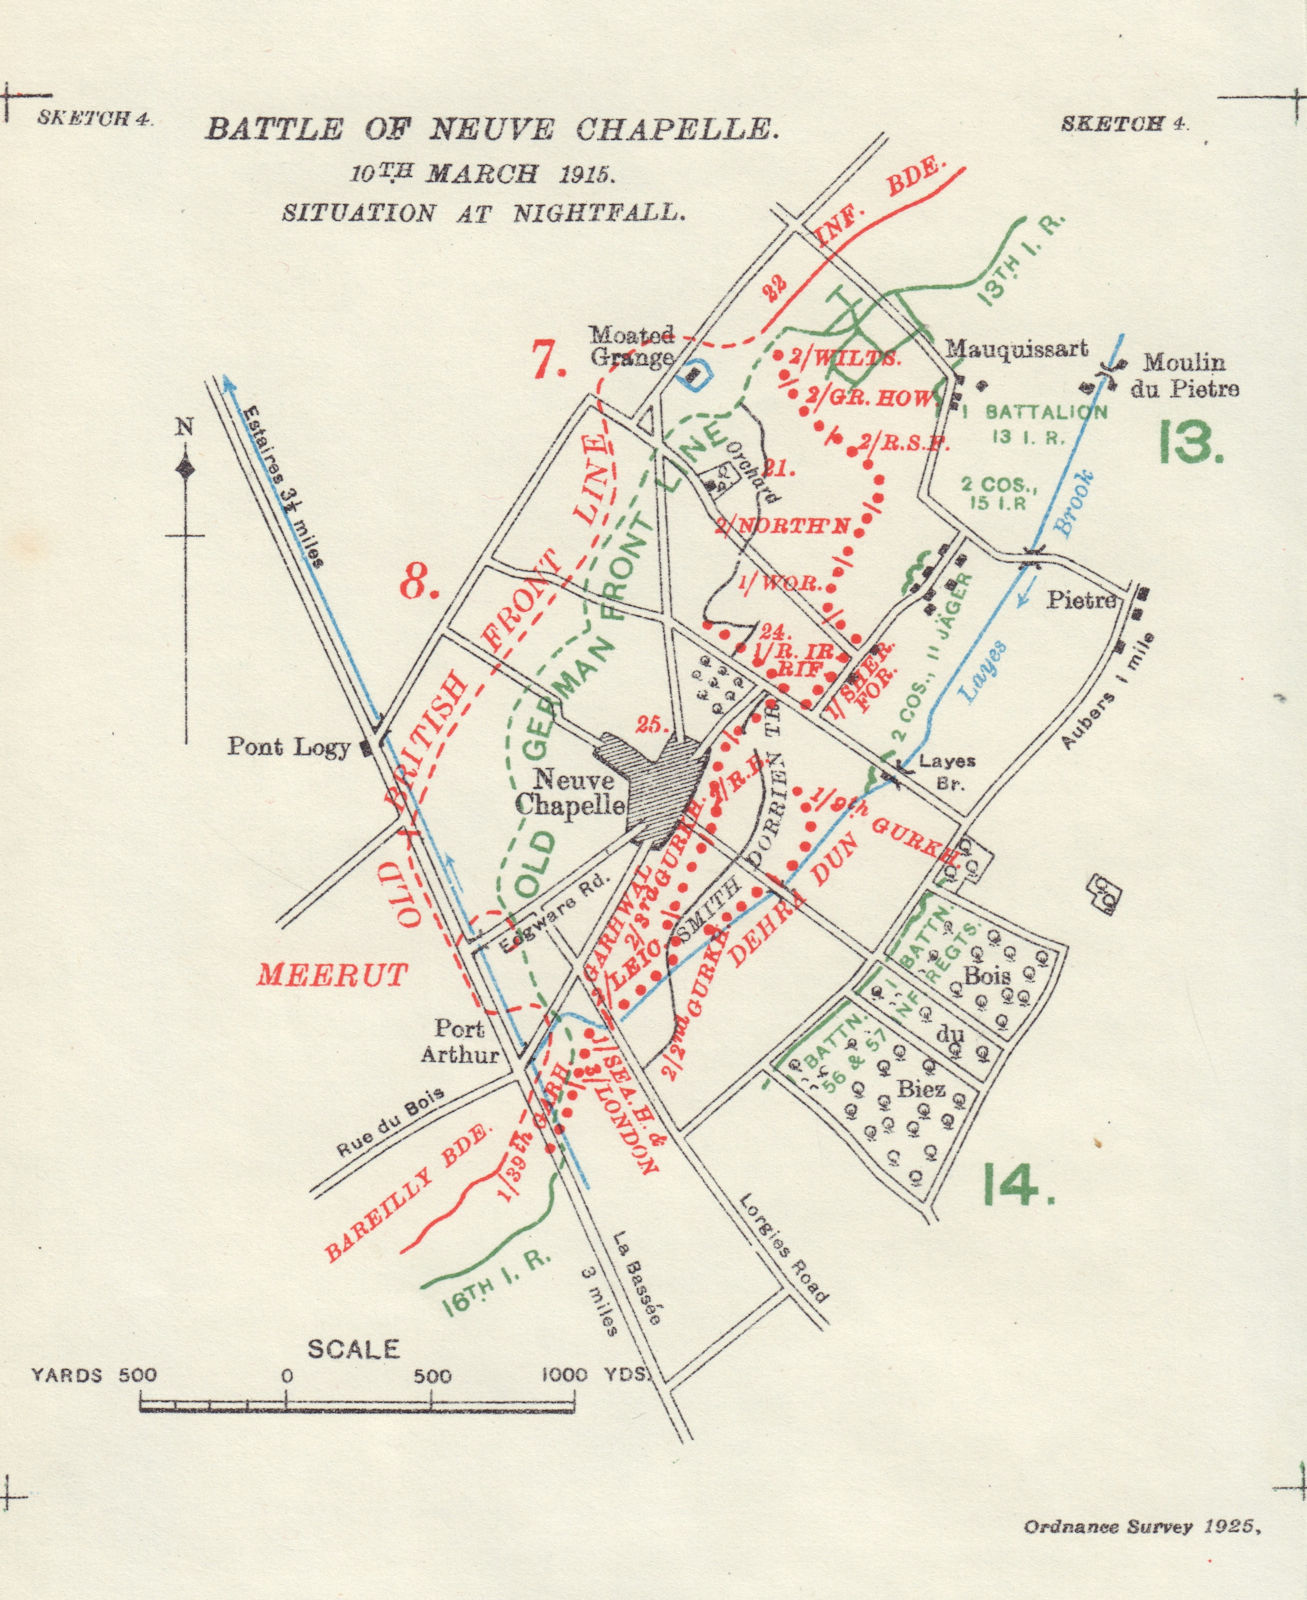 Associate Product Battle of Neuve Chapelle 10th March 1915. Nightfall situation. Trenches 1927 map